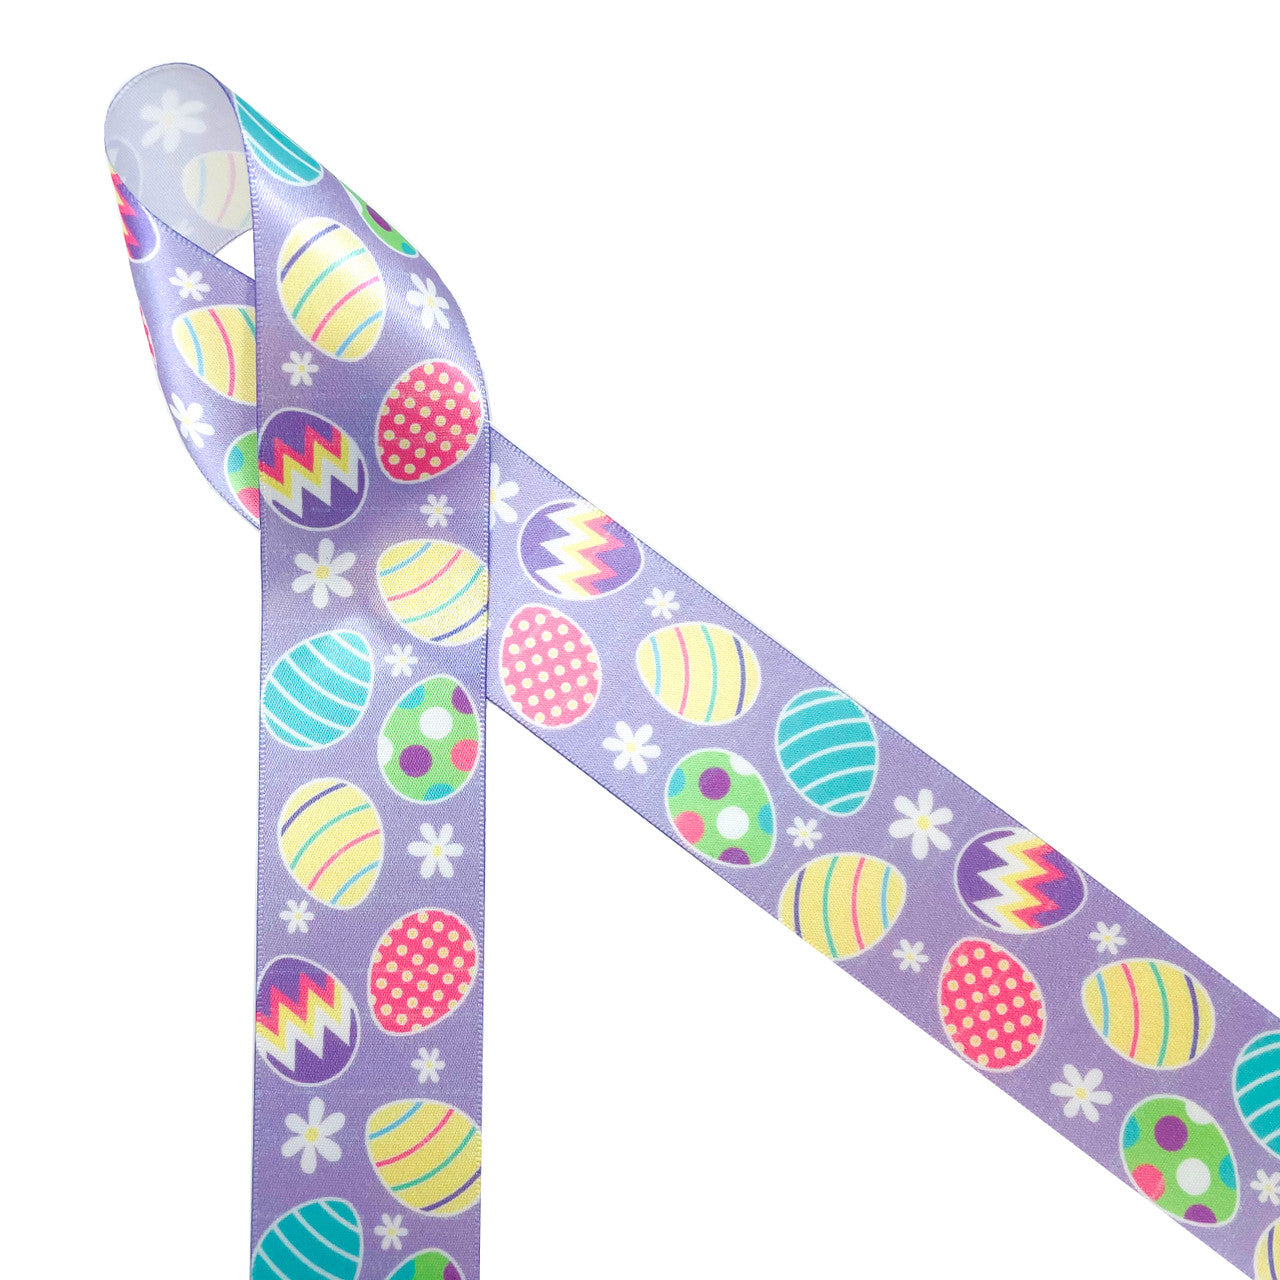 Easter eggs on a lavender background with tossed with daisies in pastel colors of pink, yellow, green, coral and blue printed on 1.5" white single face satin ribbon is the perfect ribbon for all your Easter gifts, crafts, floral designs and sewing projects. Be sure to have this ribbon on hand for Easter baskets too! All our ribbon is designed and printed in the USA